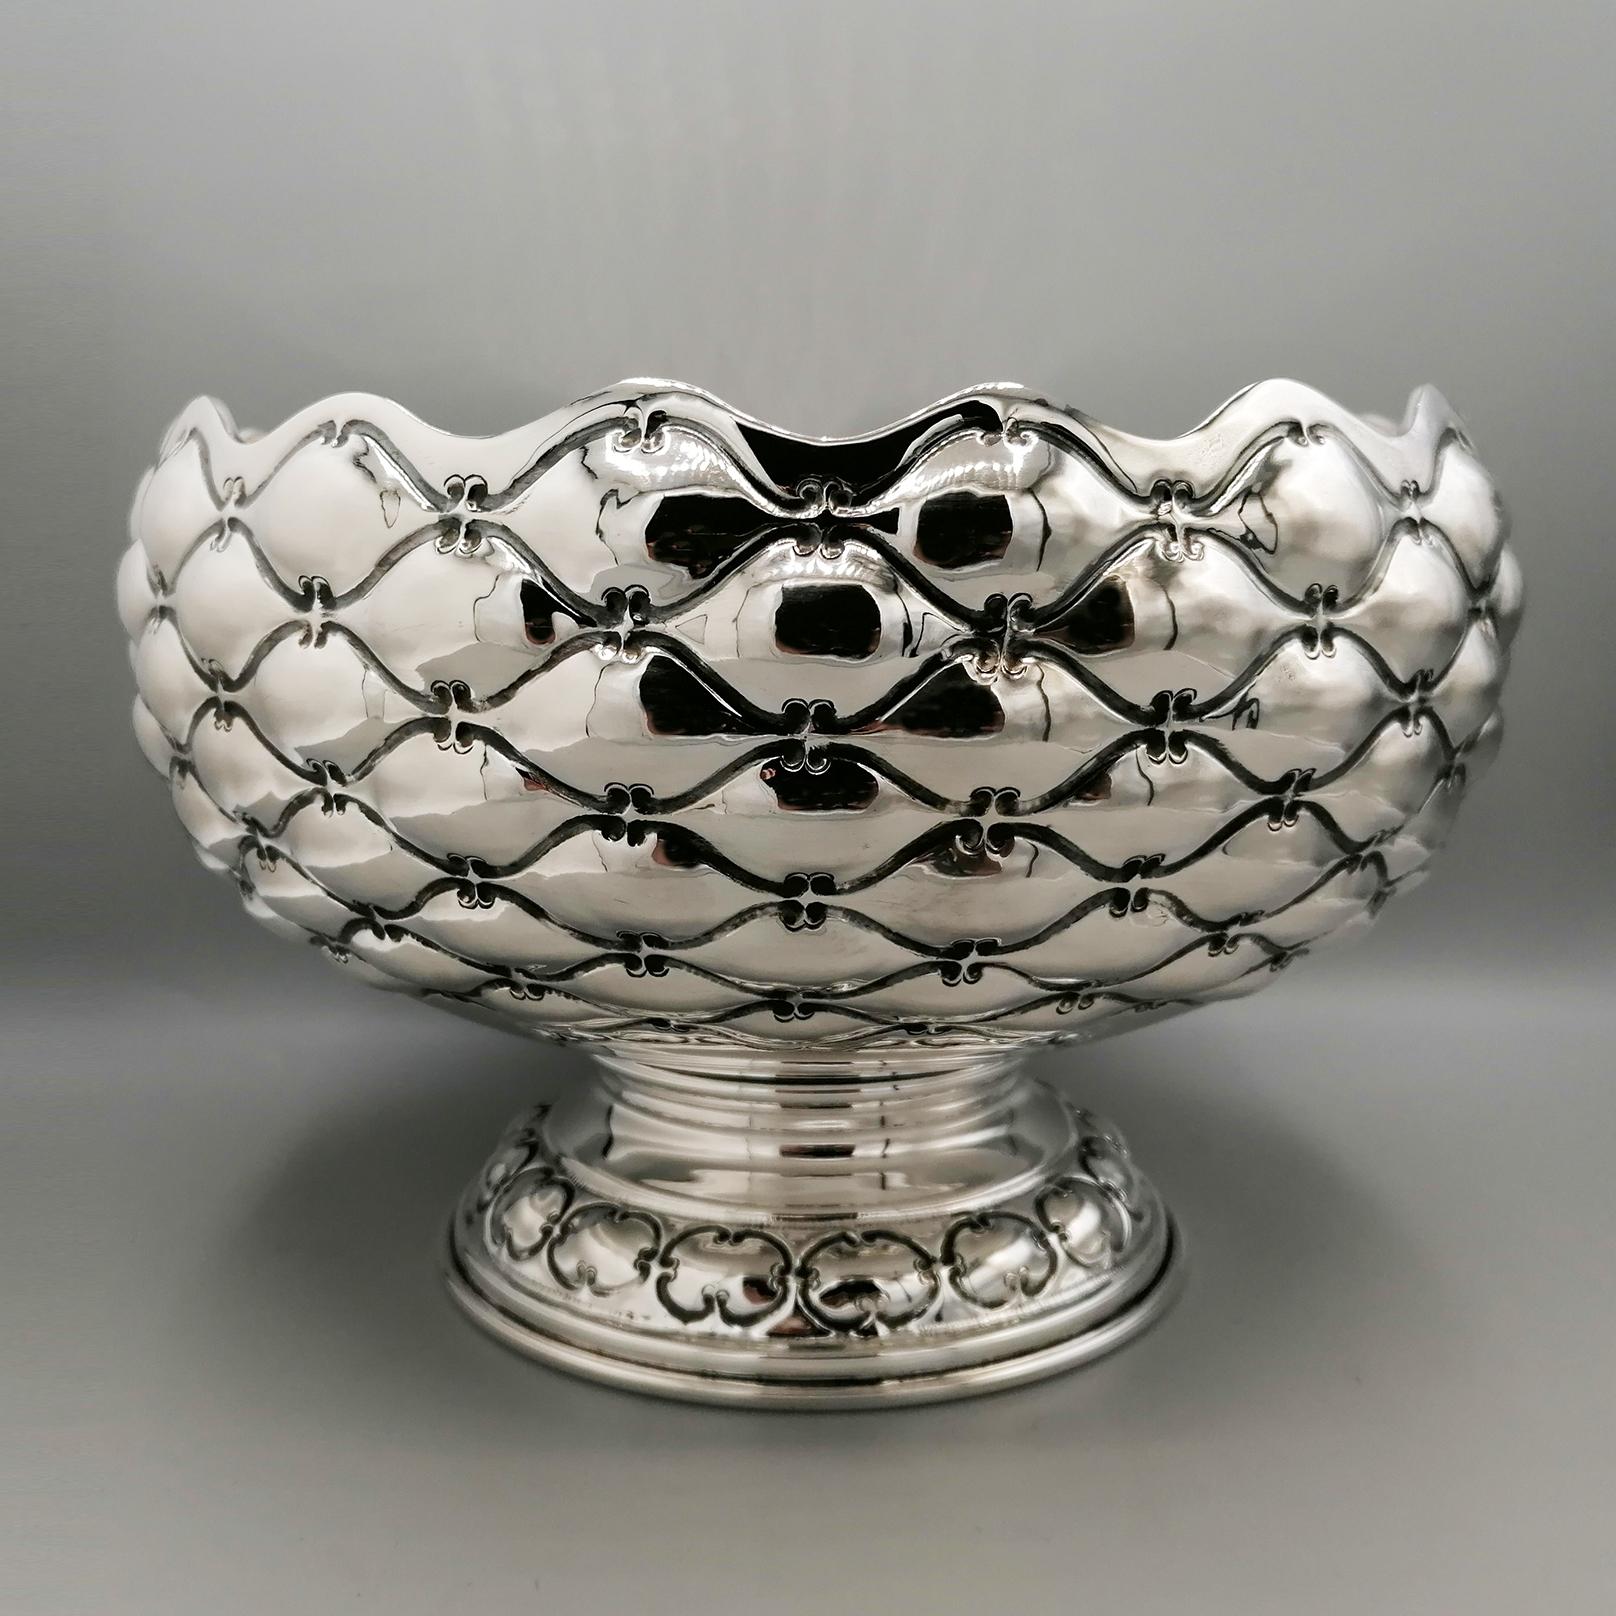 800 silver centerpiece with pineapple design For Sale 3